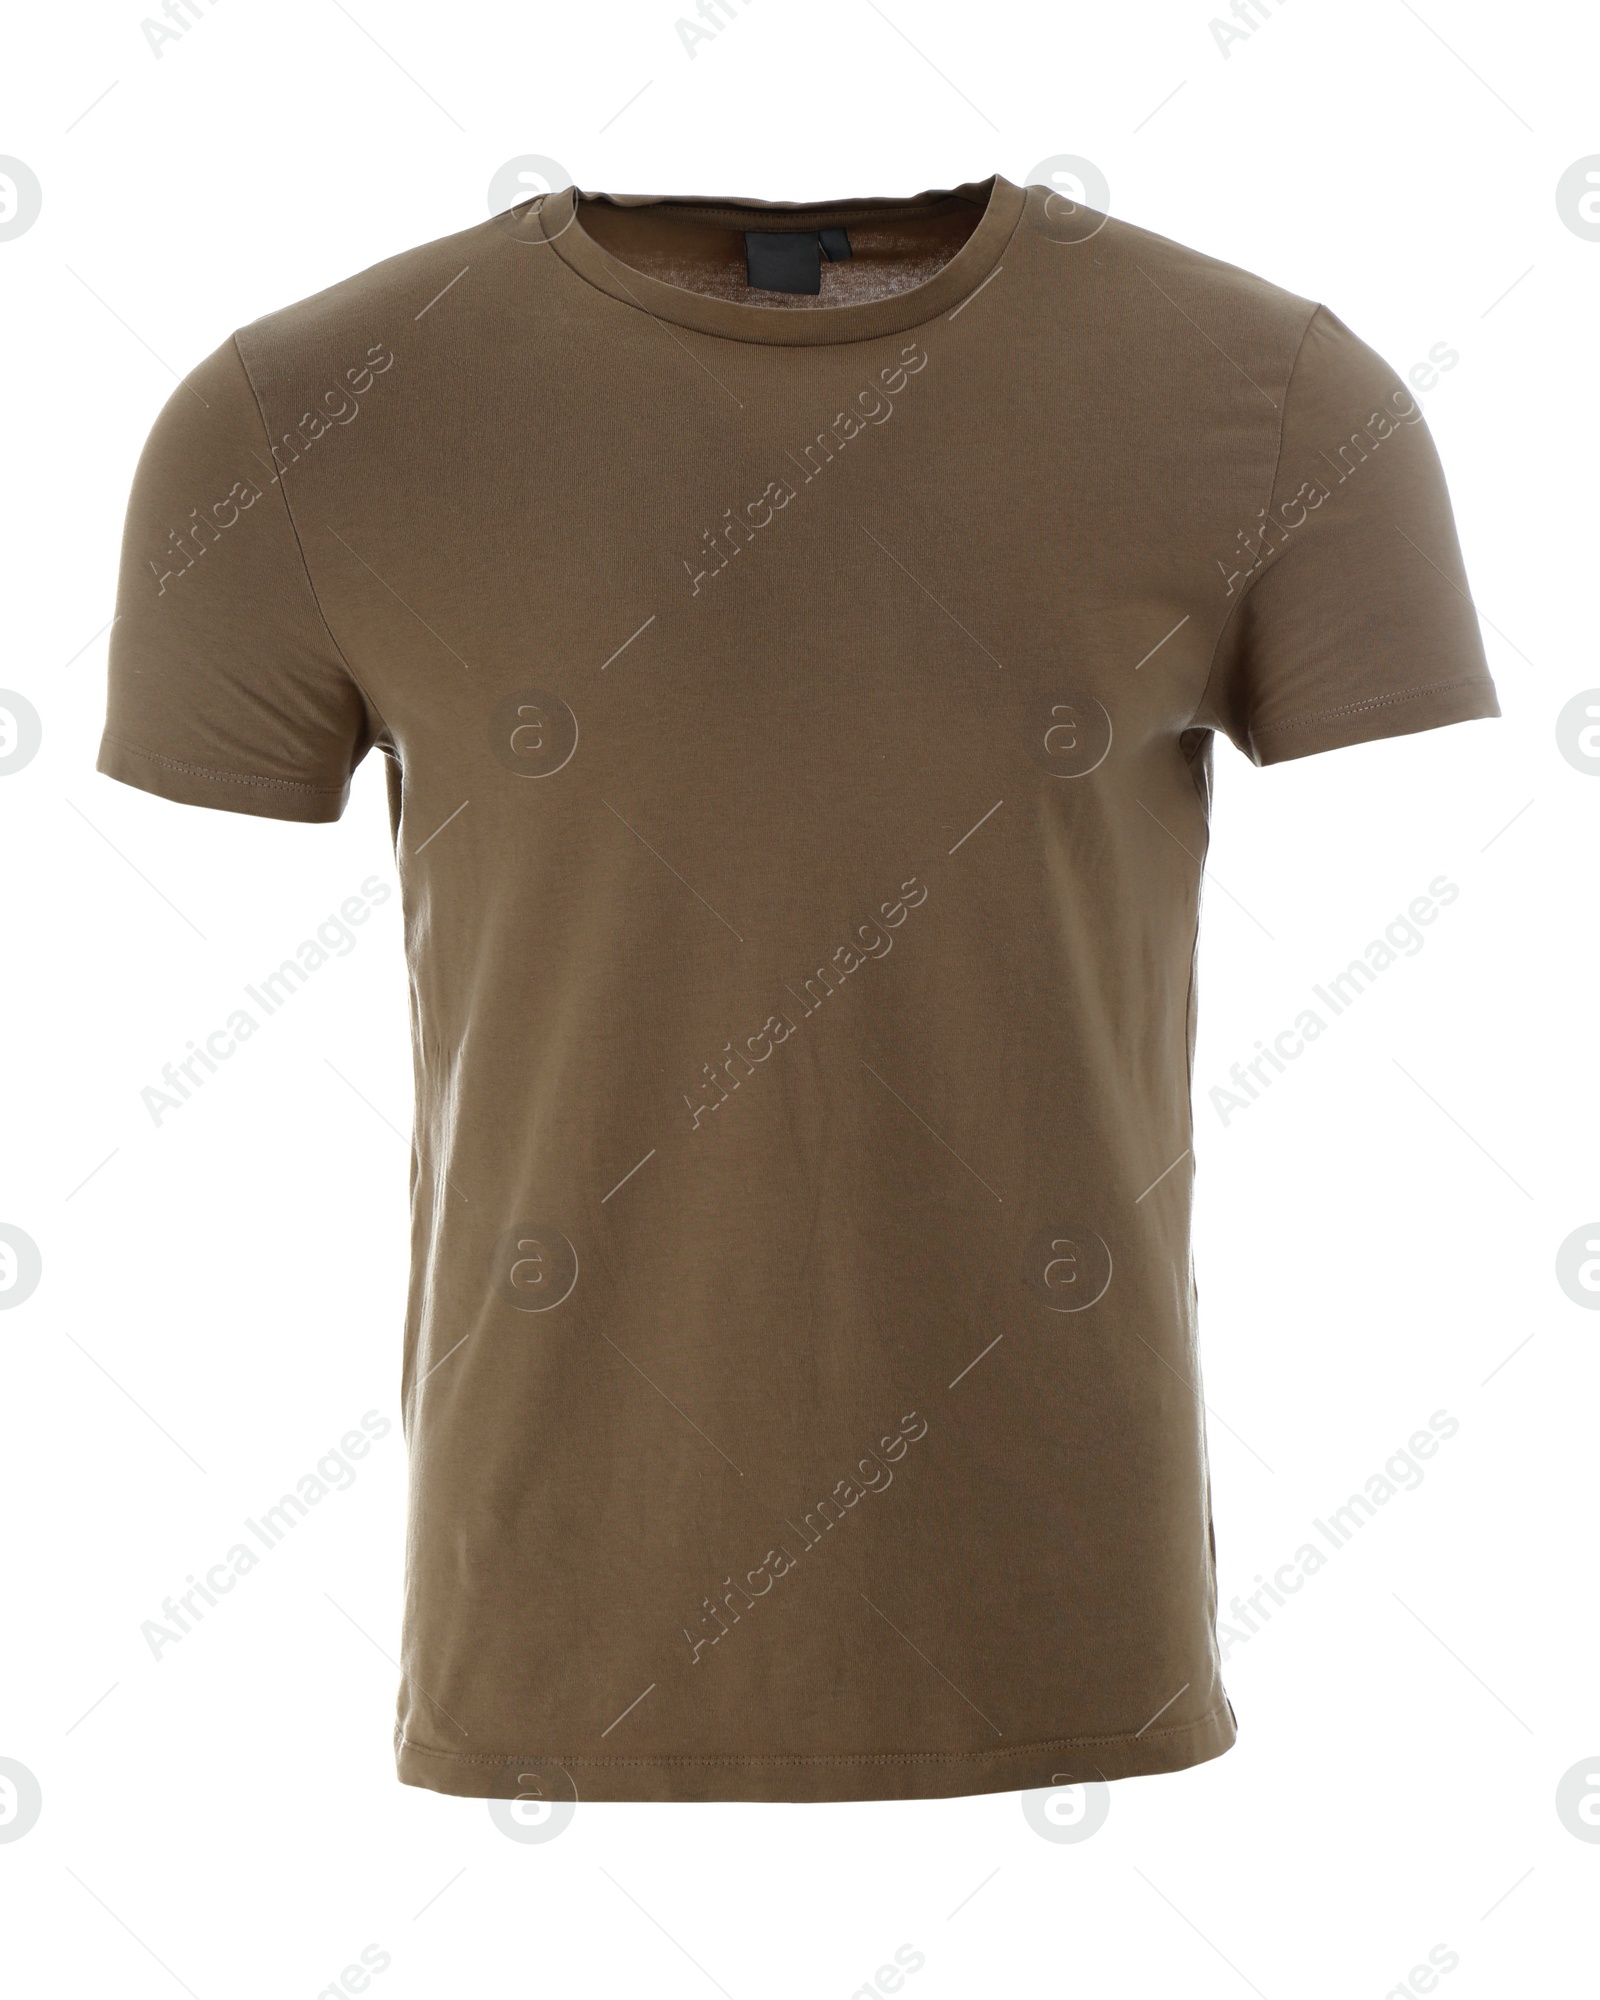 Photo of Stylish t-shirt on mannequin against white background. Men's clothes